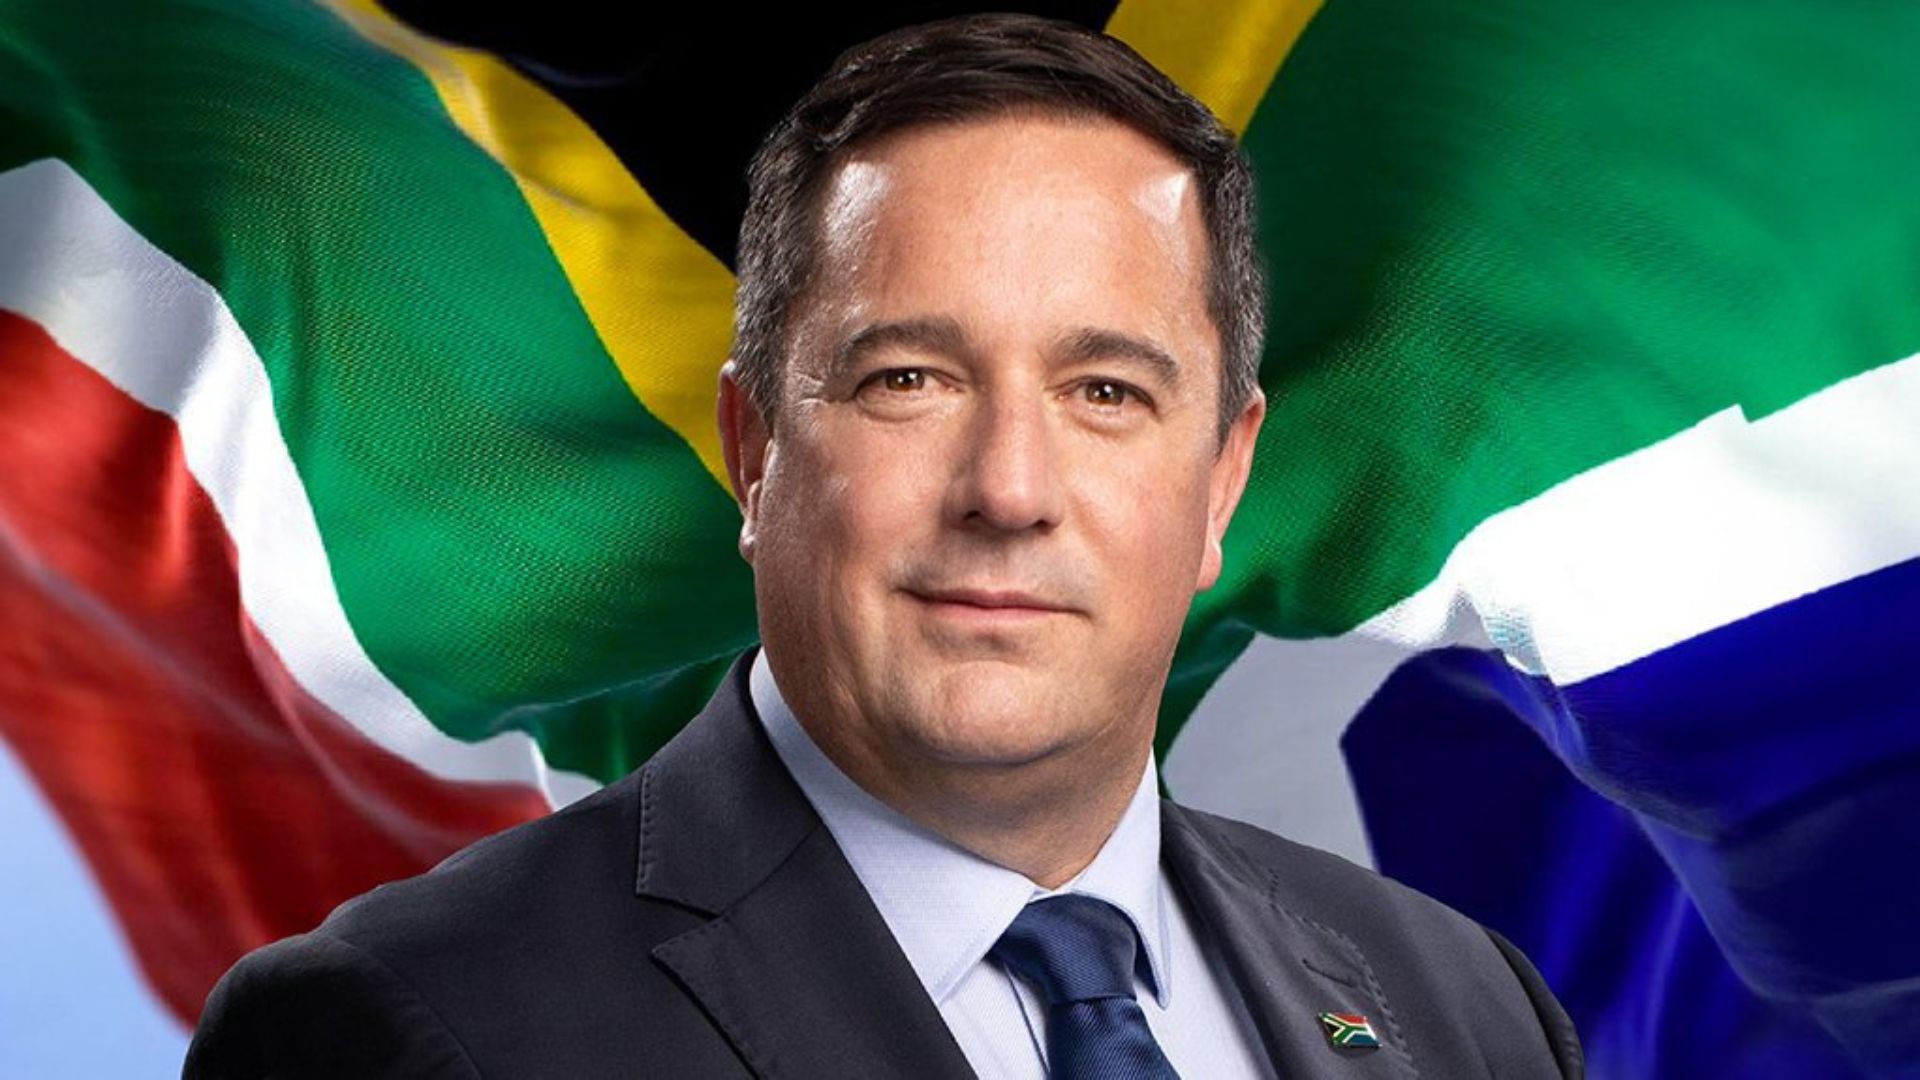 Agricultural Sector Optimistic About Steenhuisen’s Ministerial Appointment